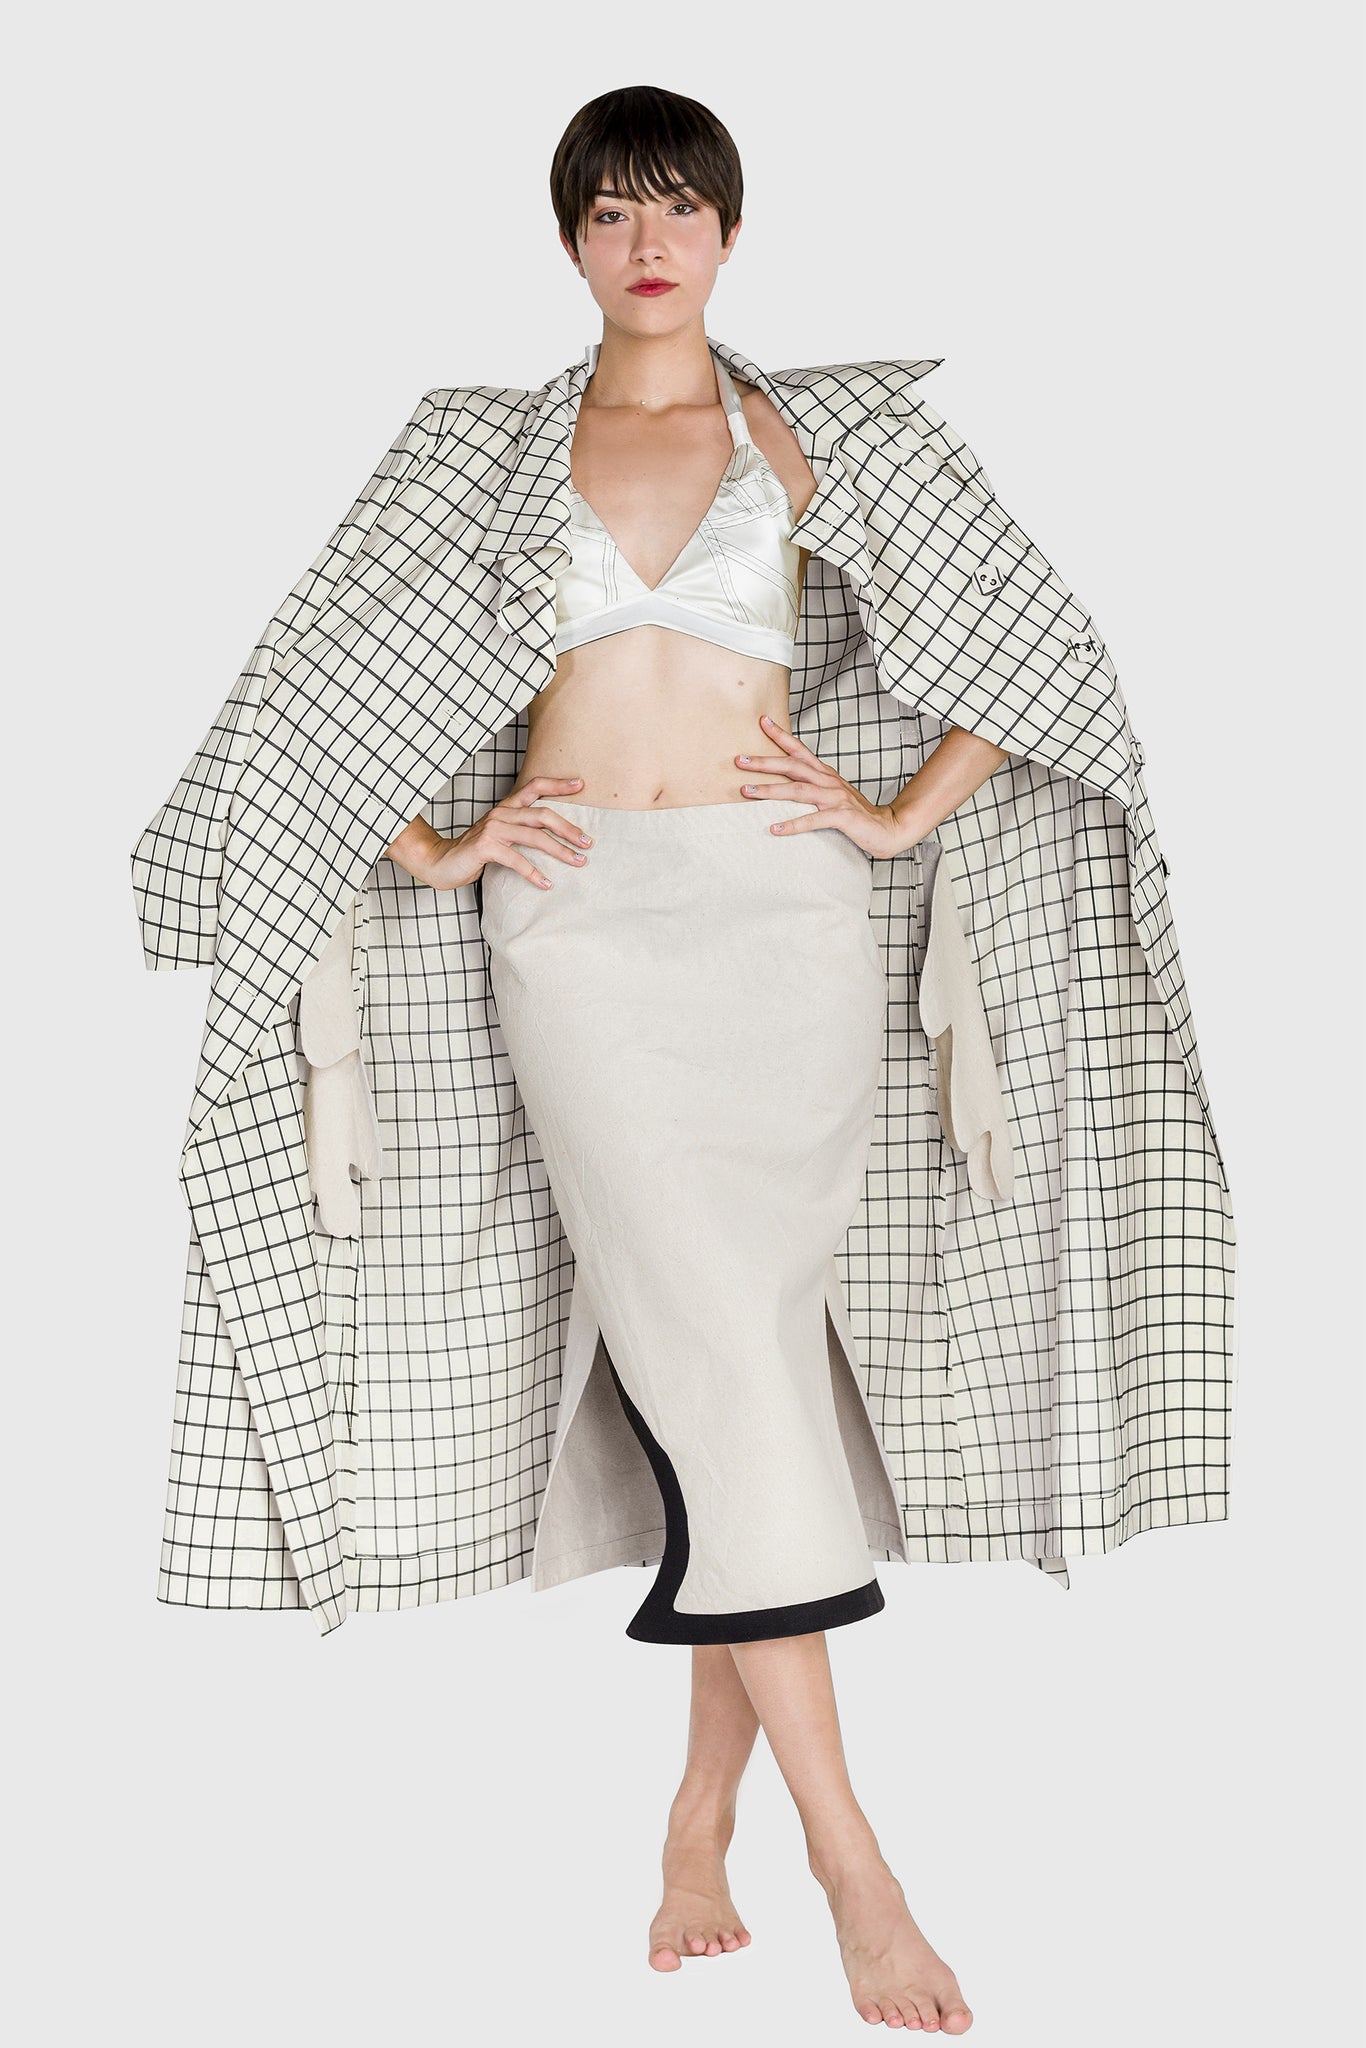 Women's elegant luxury look, spring summer wear, silk bra top, below the knee skirt, and white trench with contrasting grid pattern, all white look, black and white fashion, avantgarde resort wear